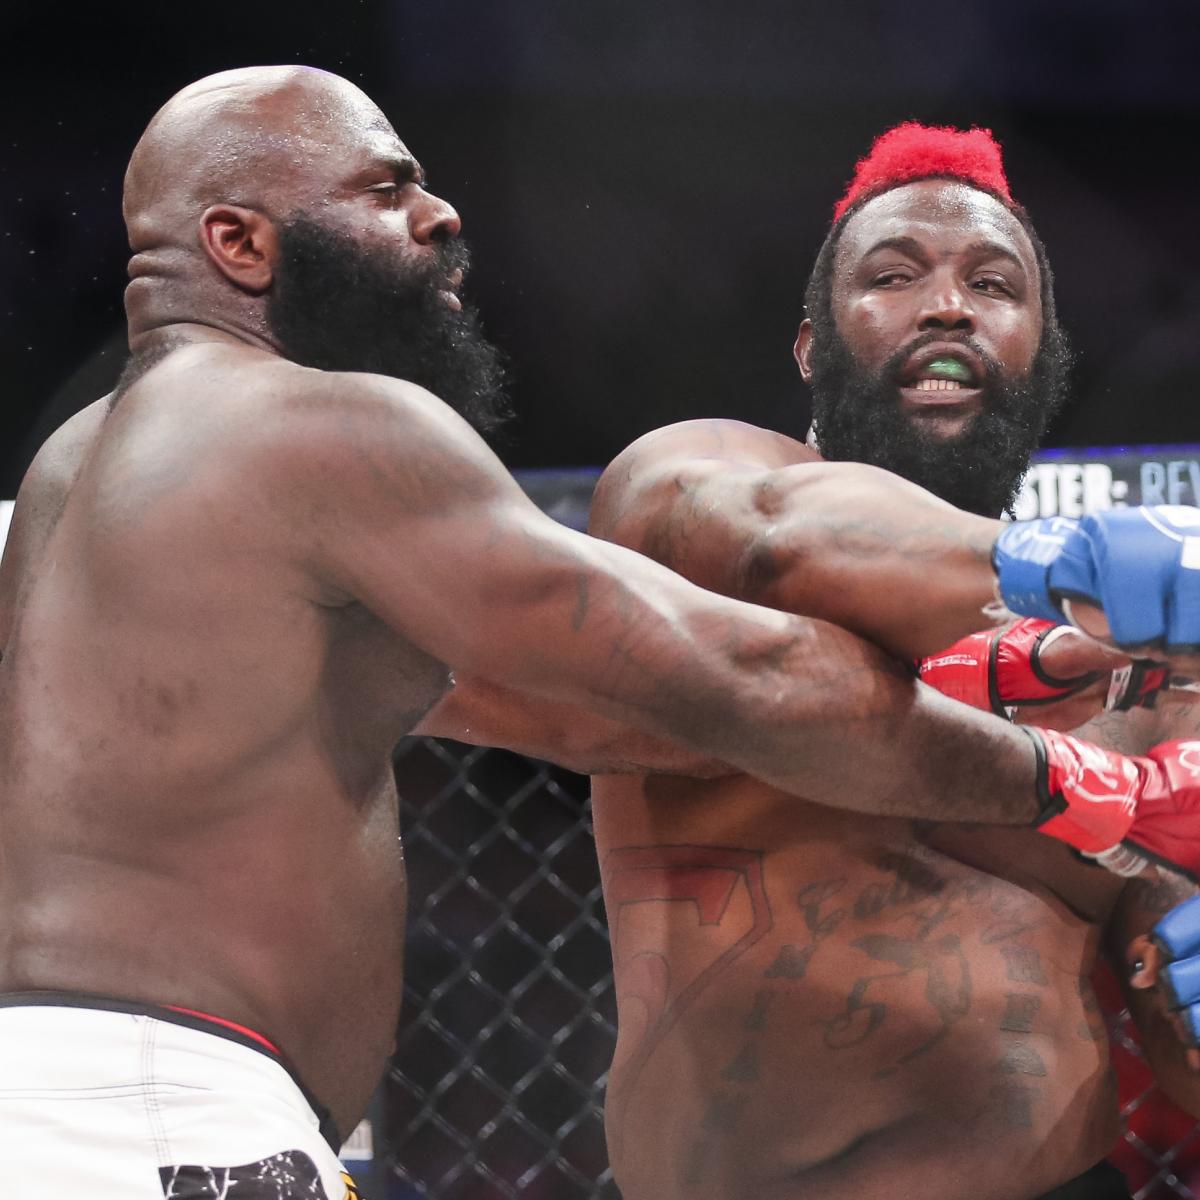 Kimbo Slice And Dada 5000 Have The Best Worst Fight In MMA History